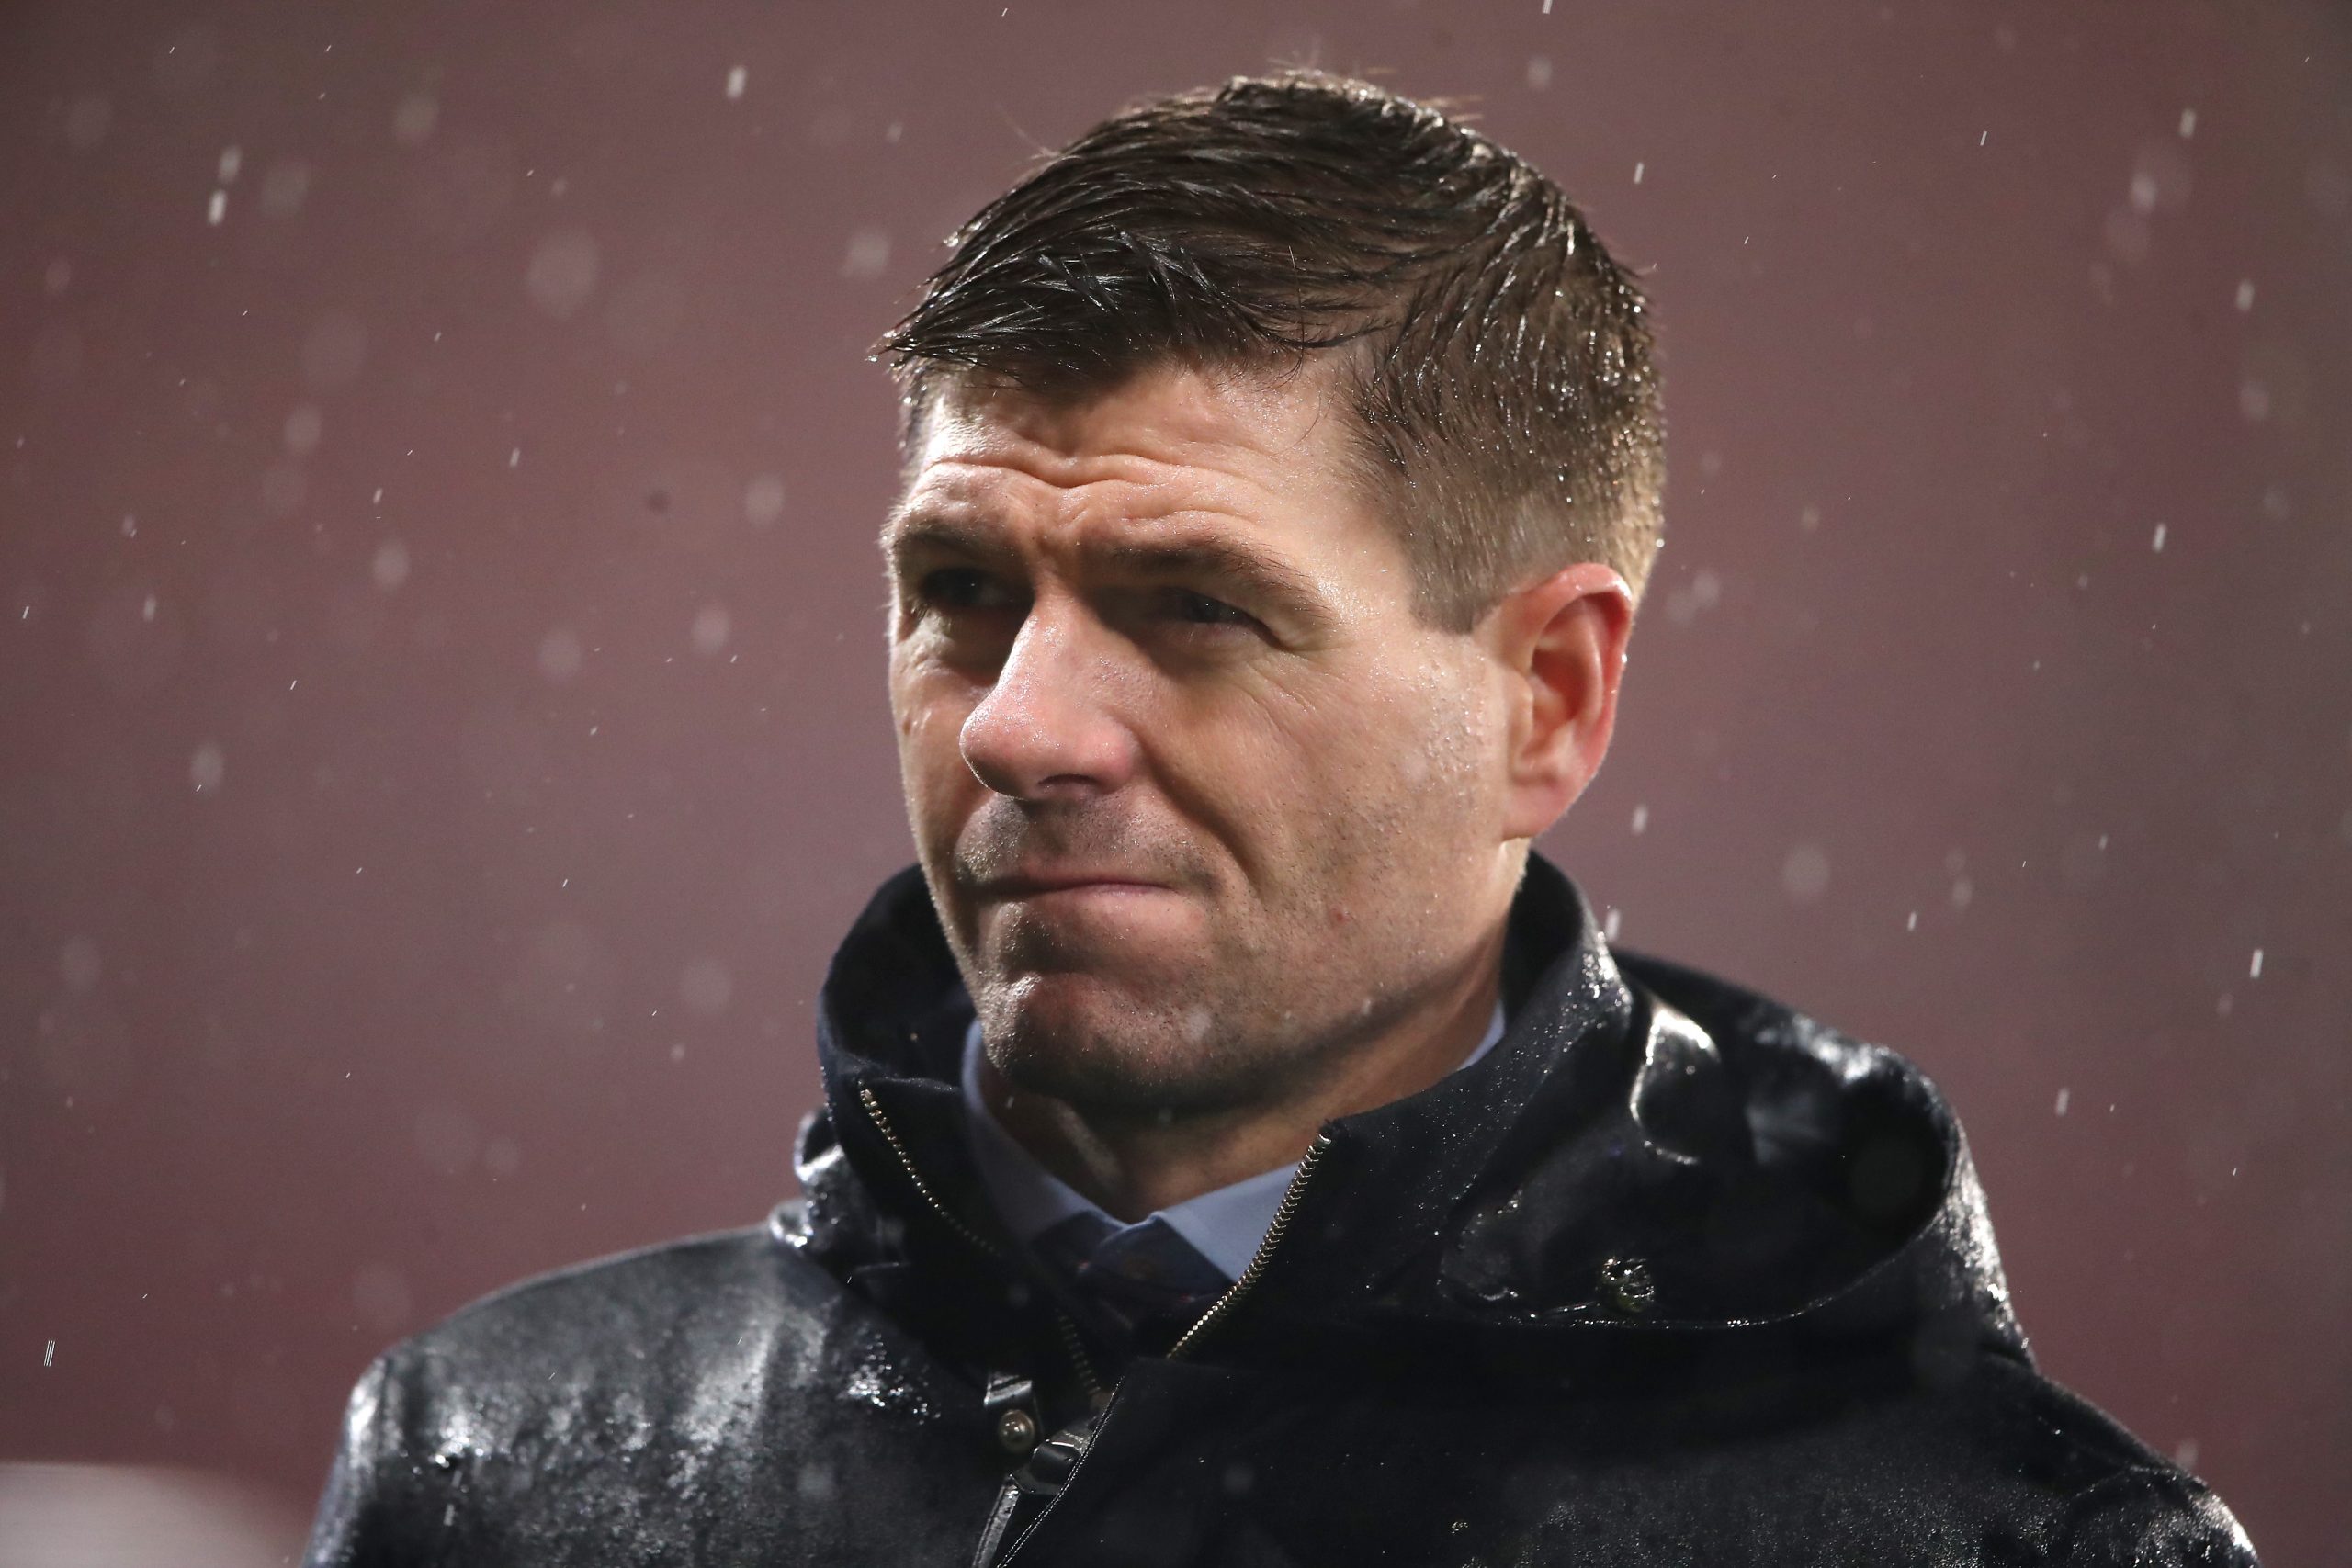 GLASGOW, SCOTLAND - DECEMBER 08: Steven Gerrard, Manager of Rangers FC looks on after the Betfred Cup Final between Rangers FC and Celtic FC at Hampden Park on December 08, 2019 in Glasgow, Scotland.